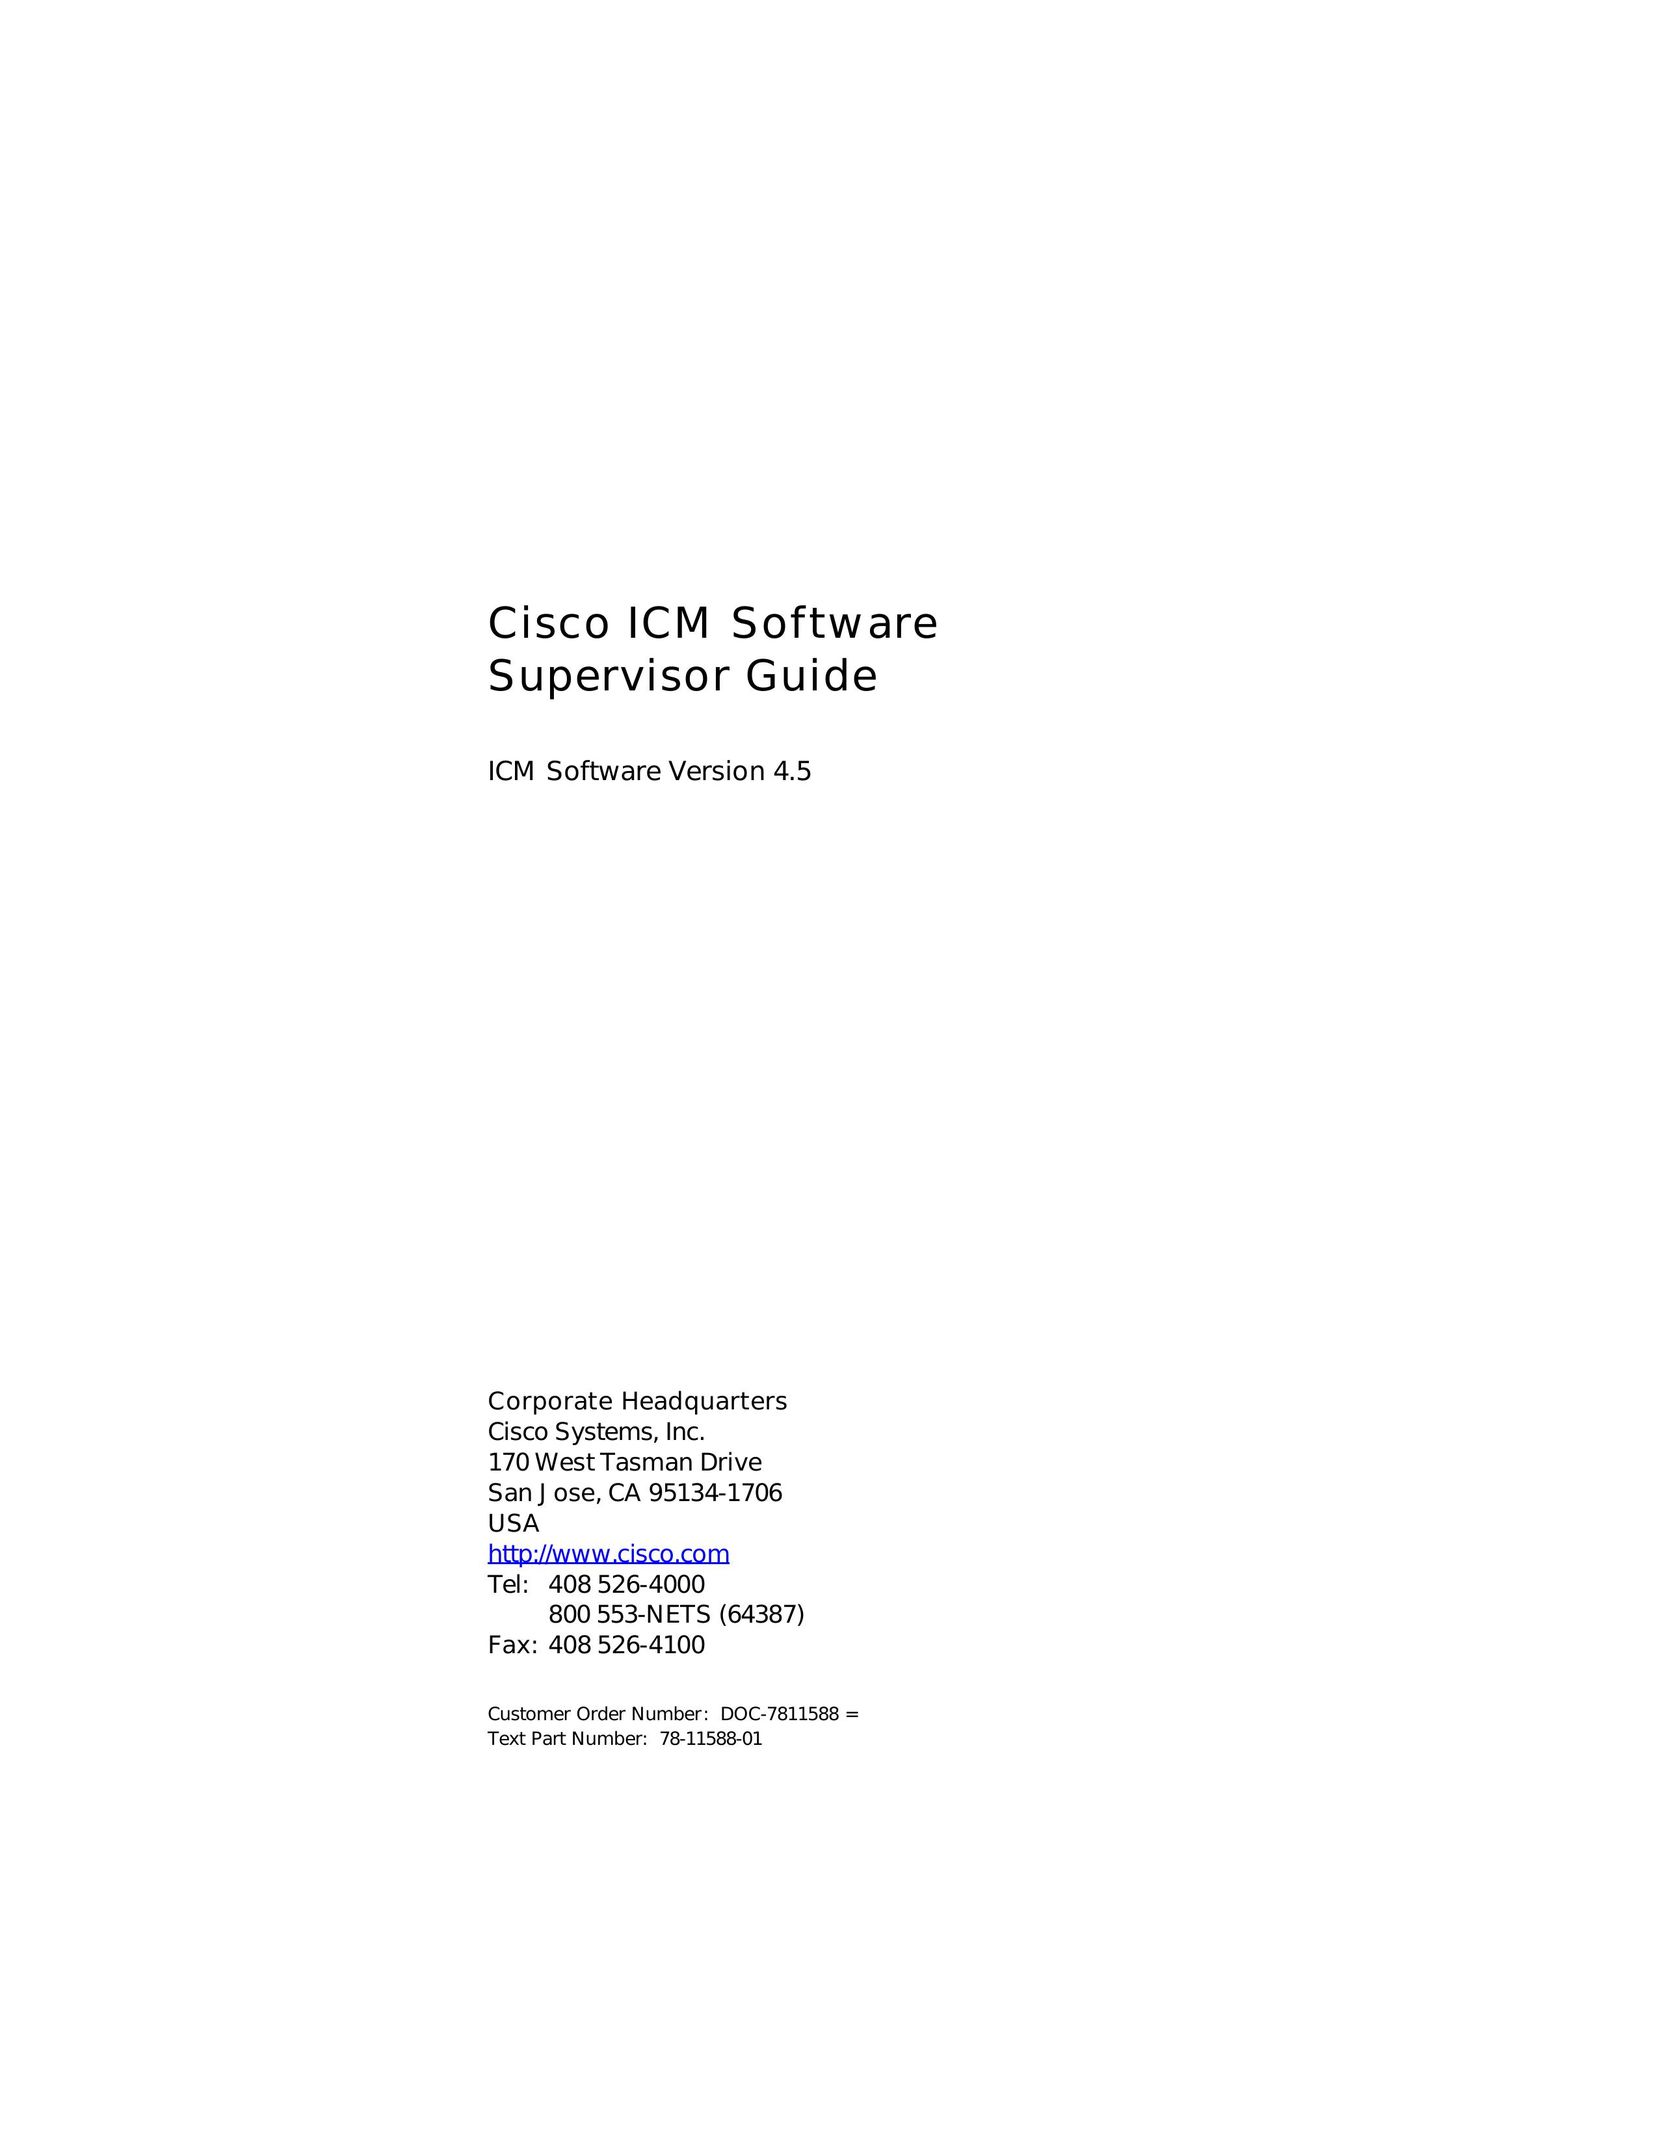 Cisco Systems ICM Software Version 4.5 Flat Panel Television User Manual